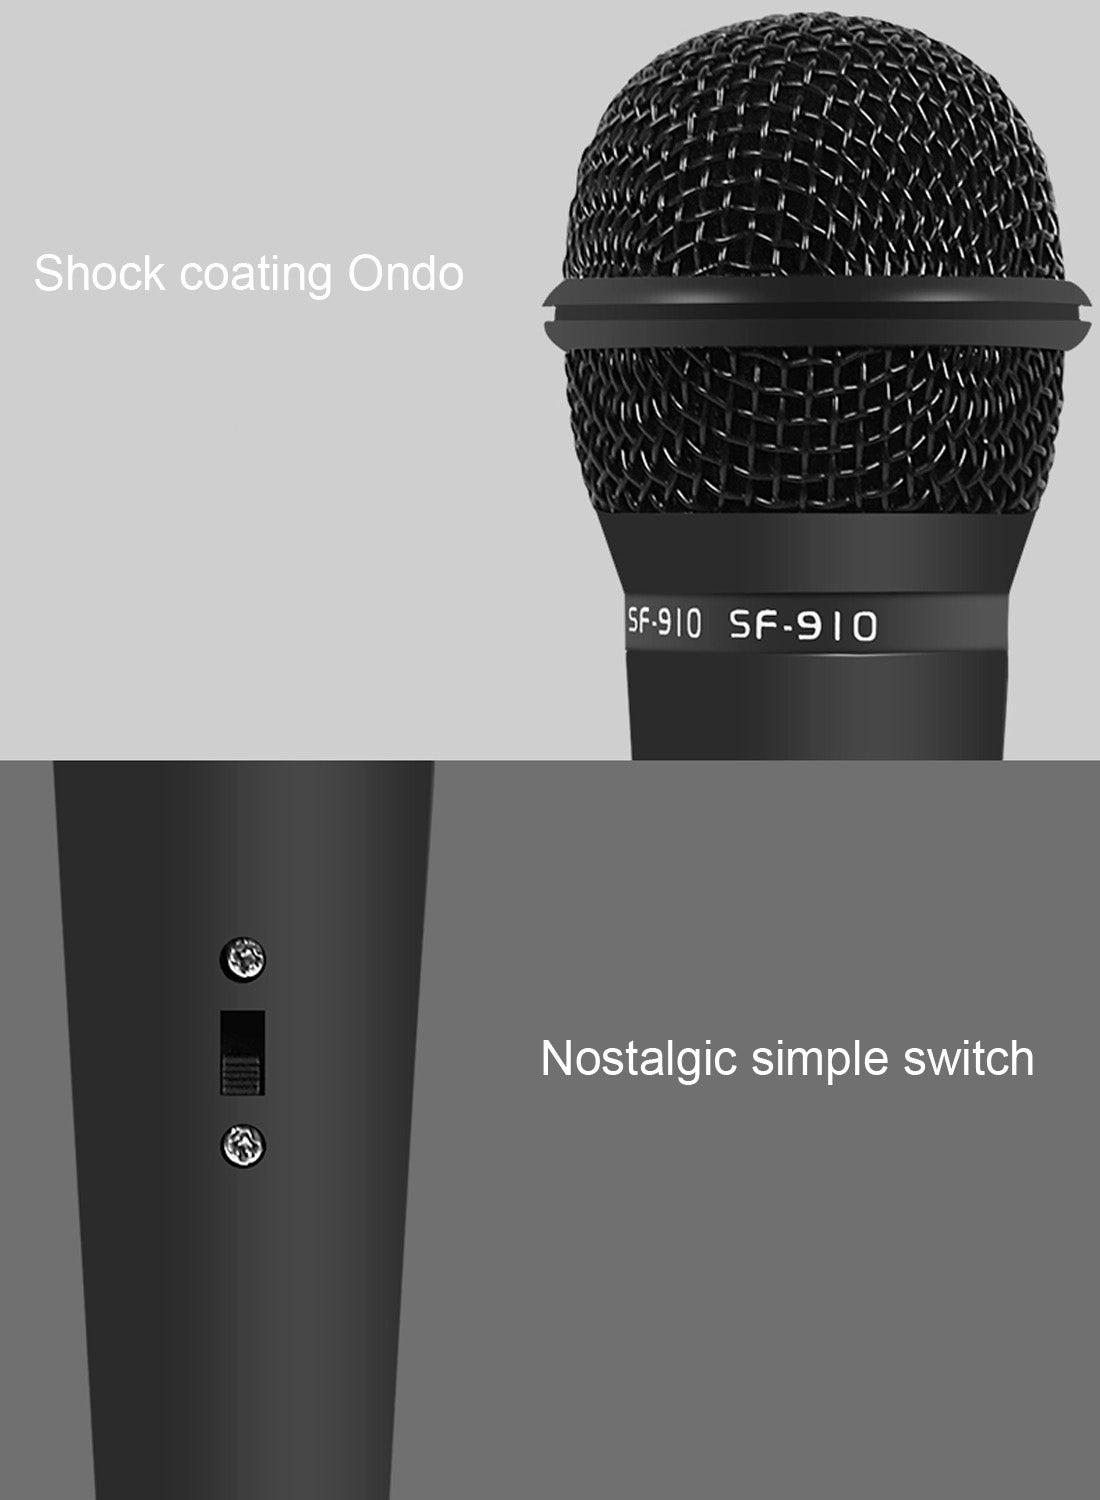 Professional Condenser Sound Recording Microphone with Tripod Holder, Cable Length: 2.0m, Compatible with PC and Mac for Live Broadcast Show, KTV, etc.(Black)